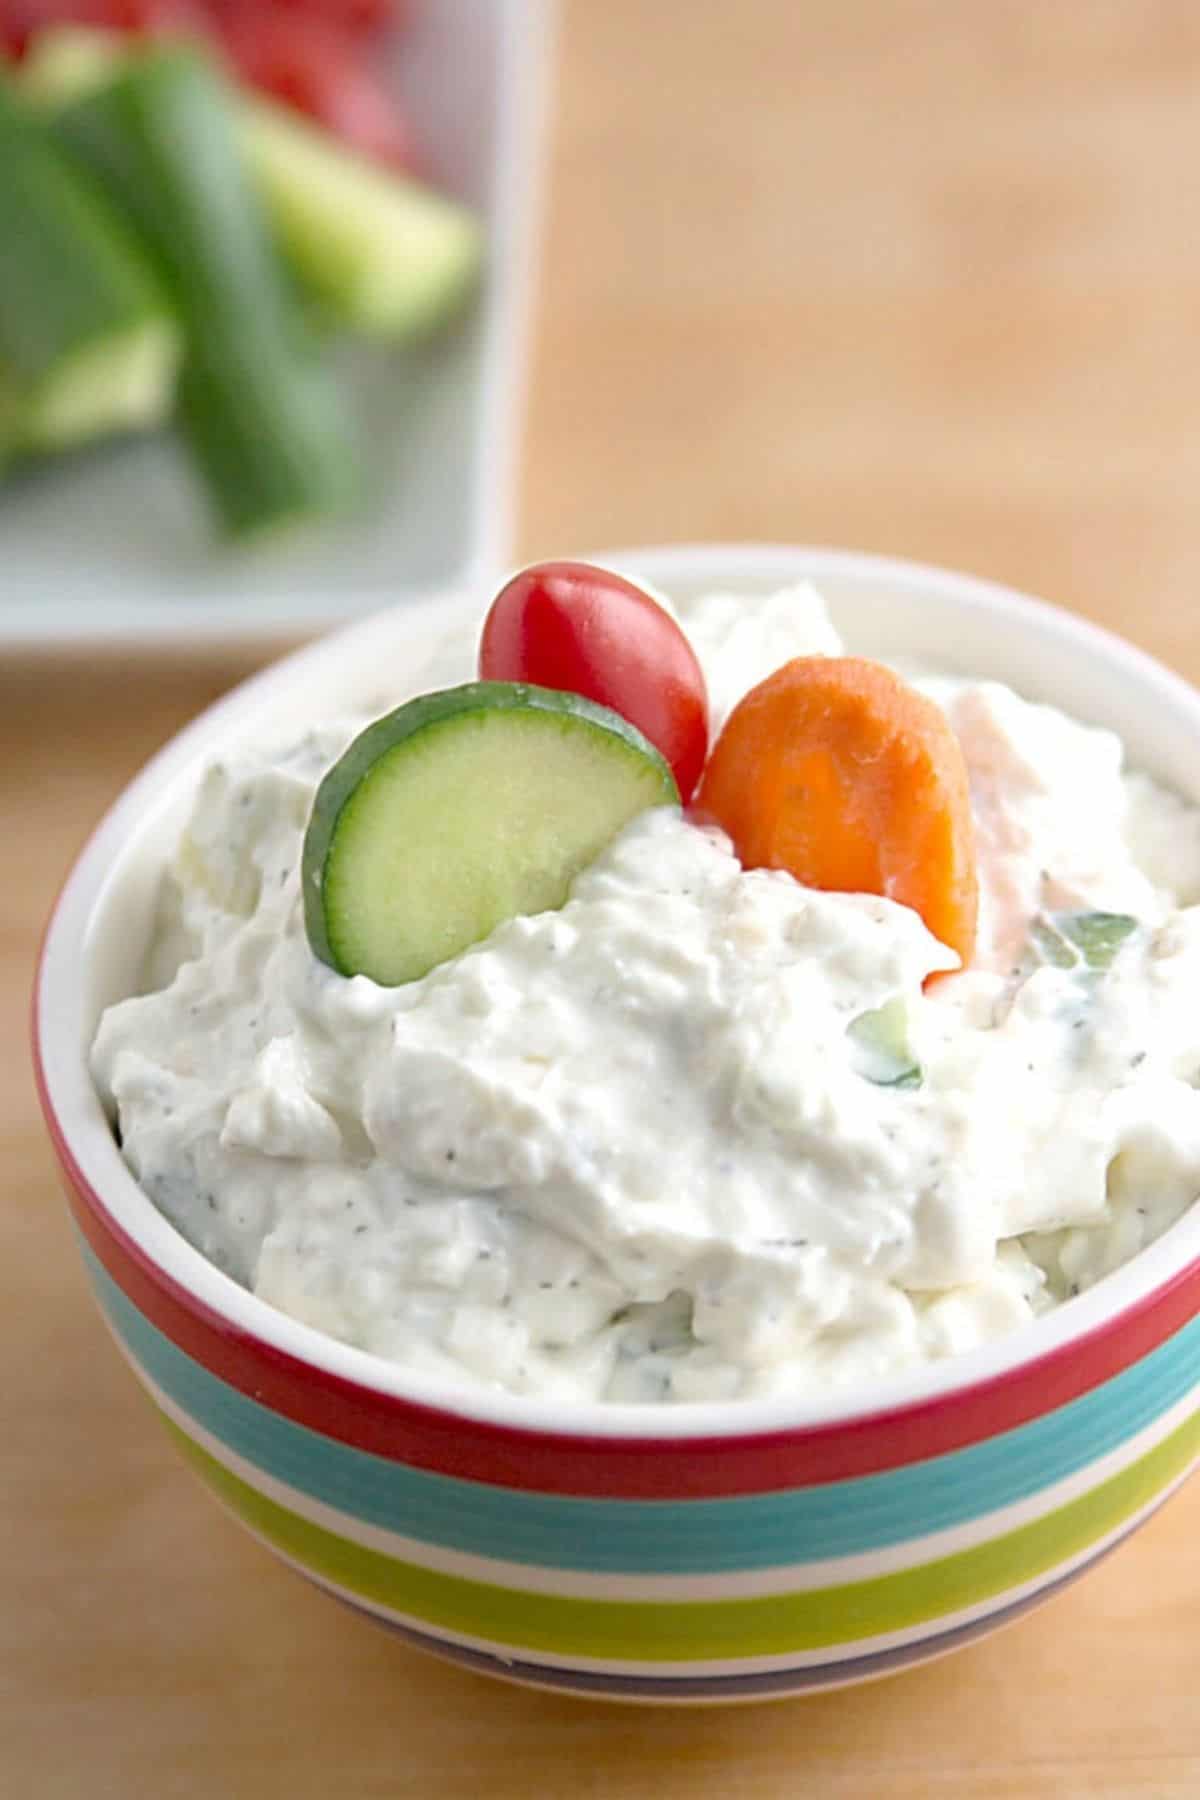 Creamy cucumber dill dip in a striped bowl with a few raw veggies placed in the top.